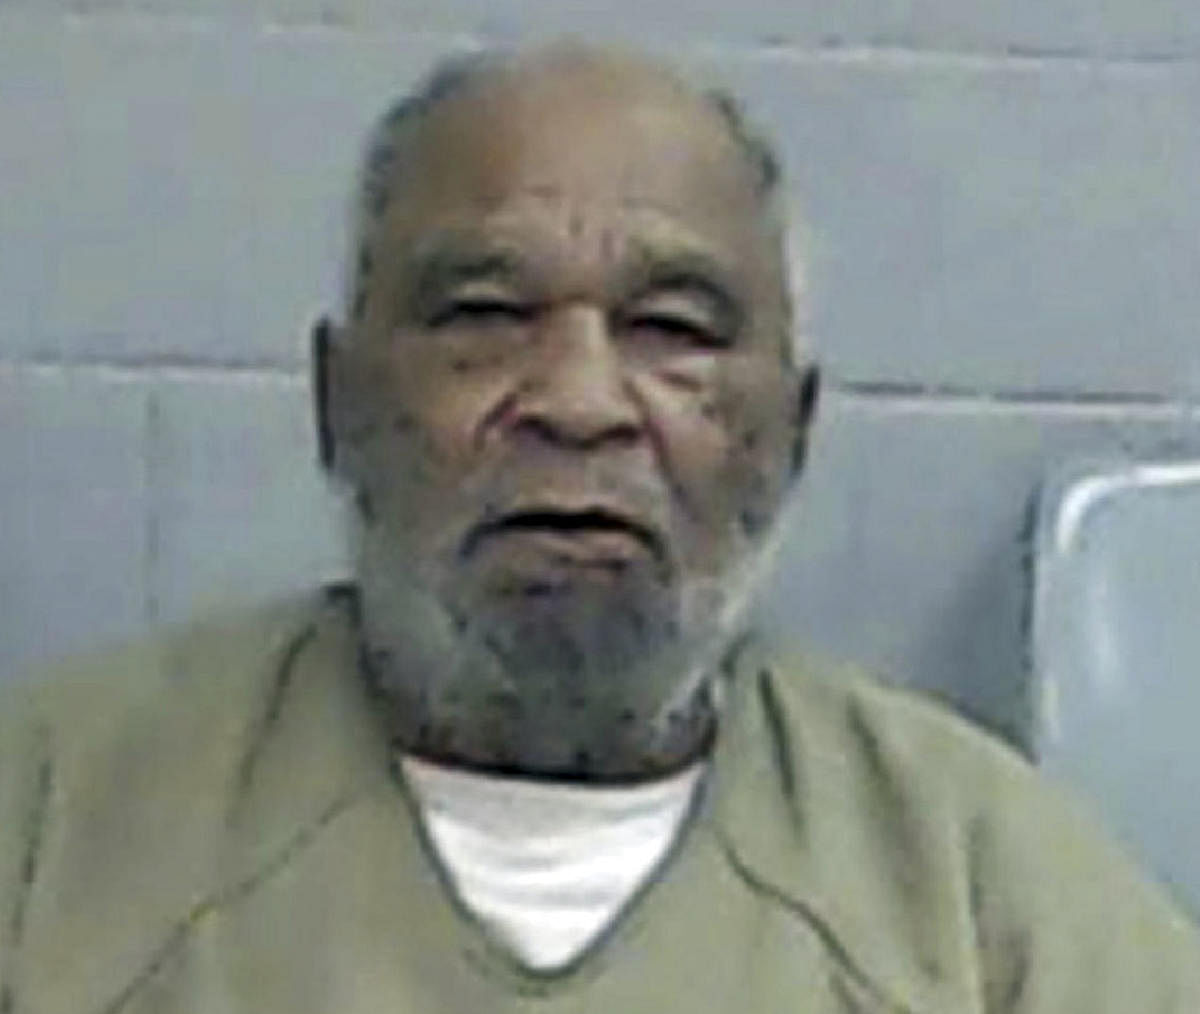 Samuel Little preyed mainly on drug addicts and prostitutes during a decades-long murder spree that stretched from coast to coast, the Federal Bureau of Investigation (FBI) said in a report. (AFP Photo)